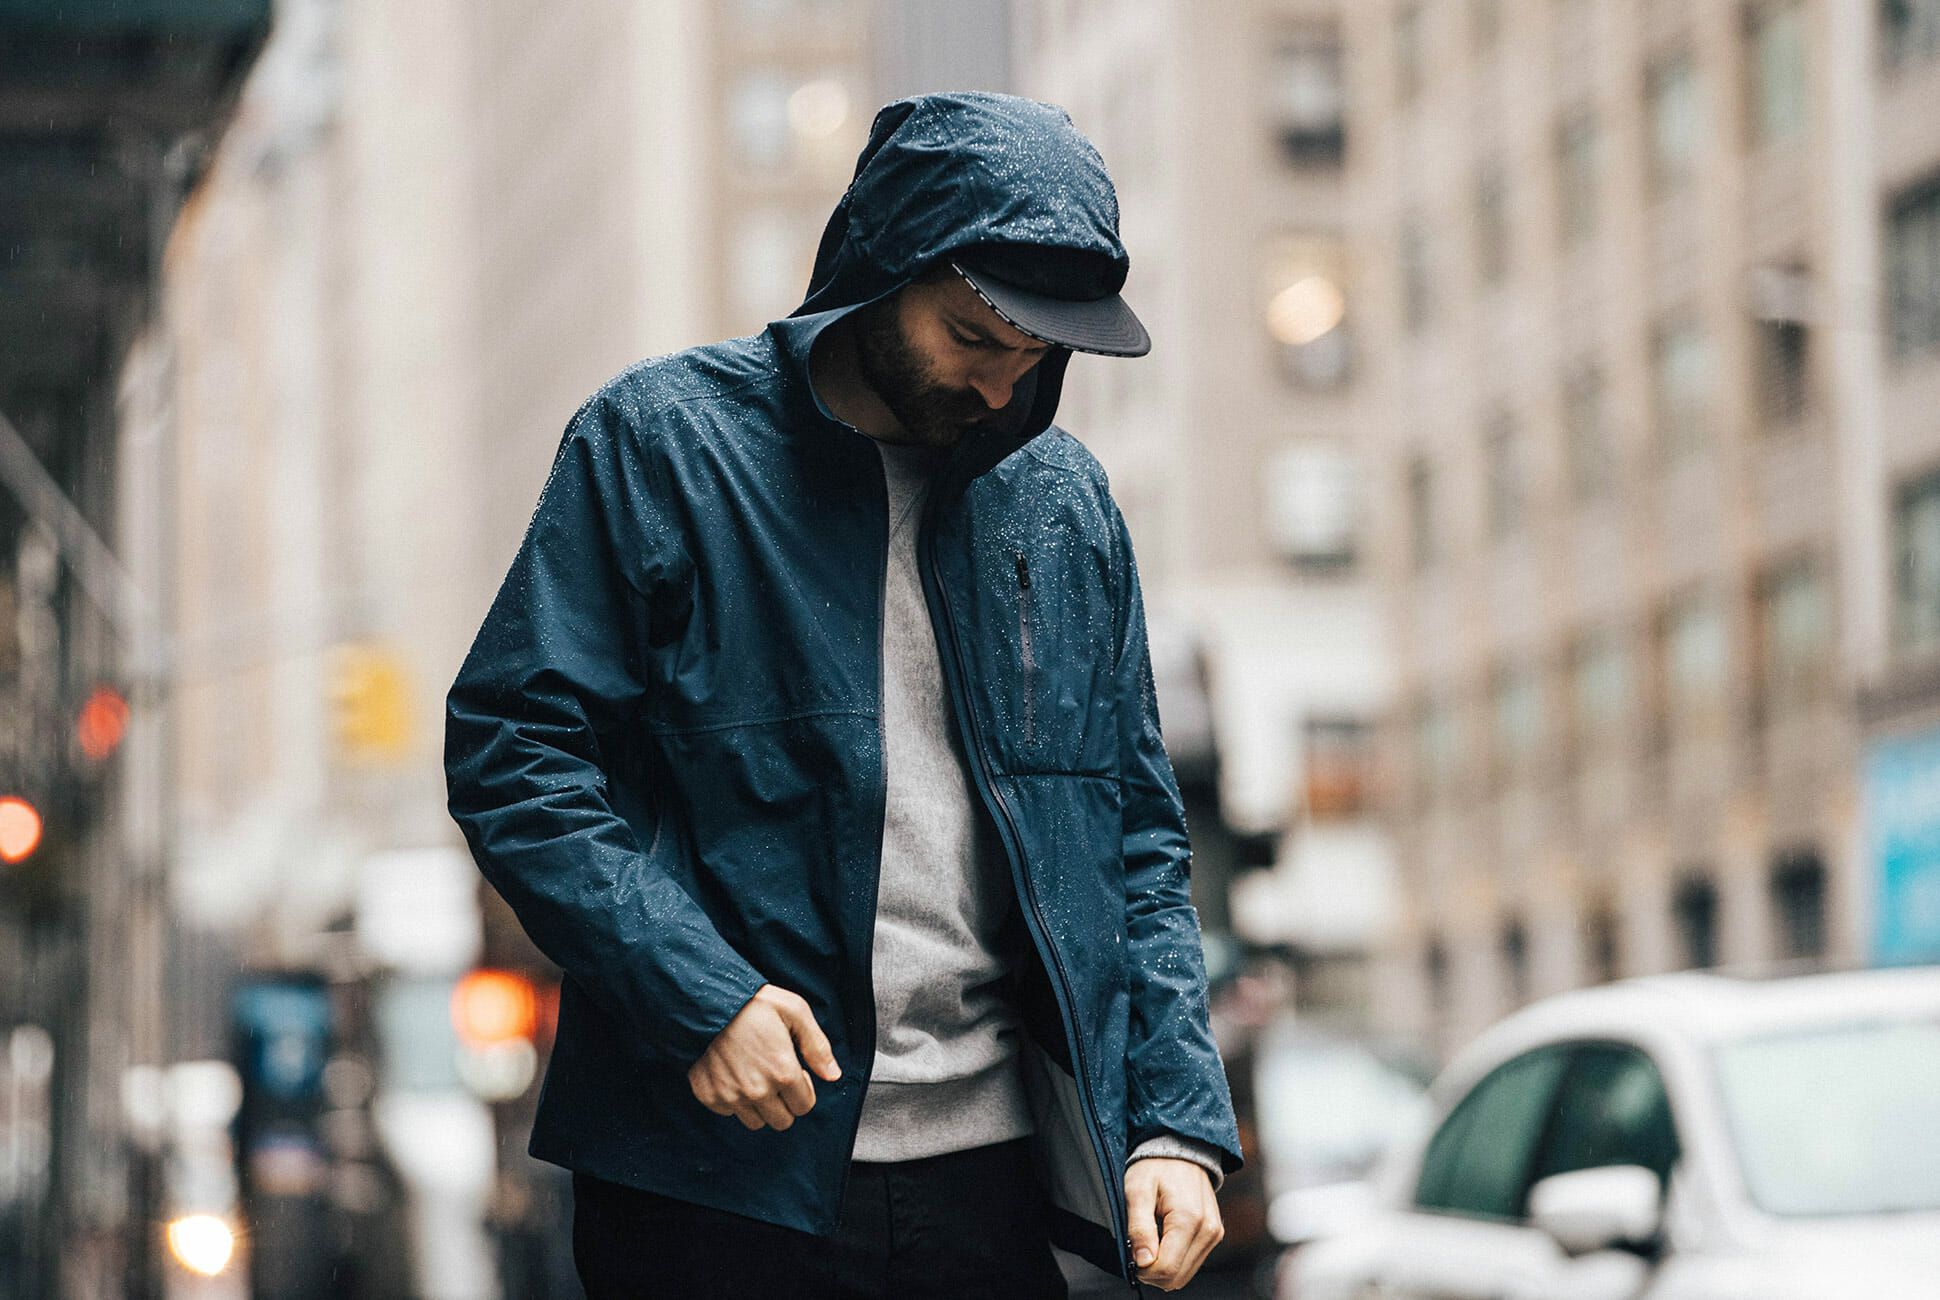 The 10 Best Rain Jackets of 2021